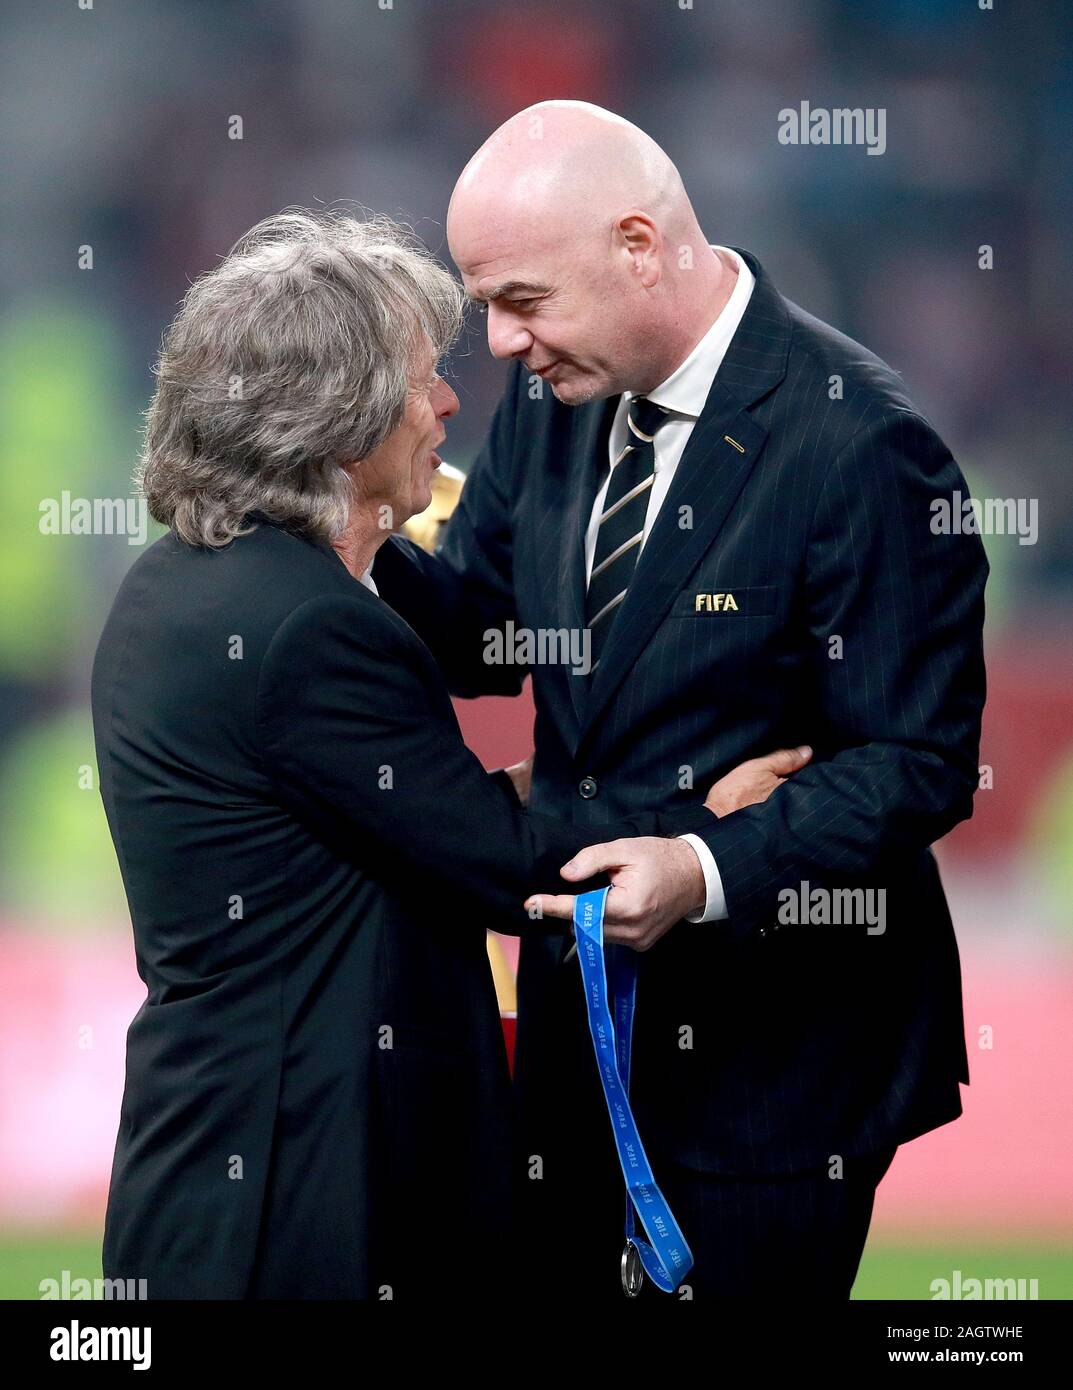 Flamengo manager Jorge Jesus with FIFA President Gianni Infantino after the FIFA Club World Cup final at the Khalifa International Stadium, Doha. Stock Photo